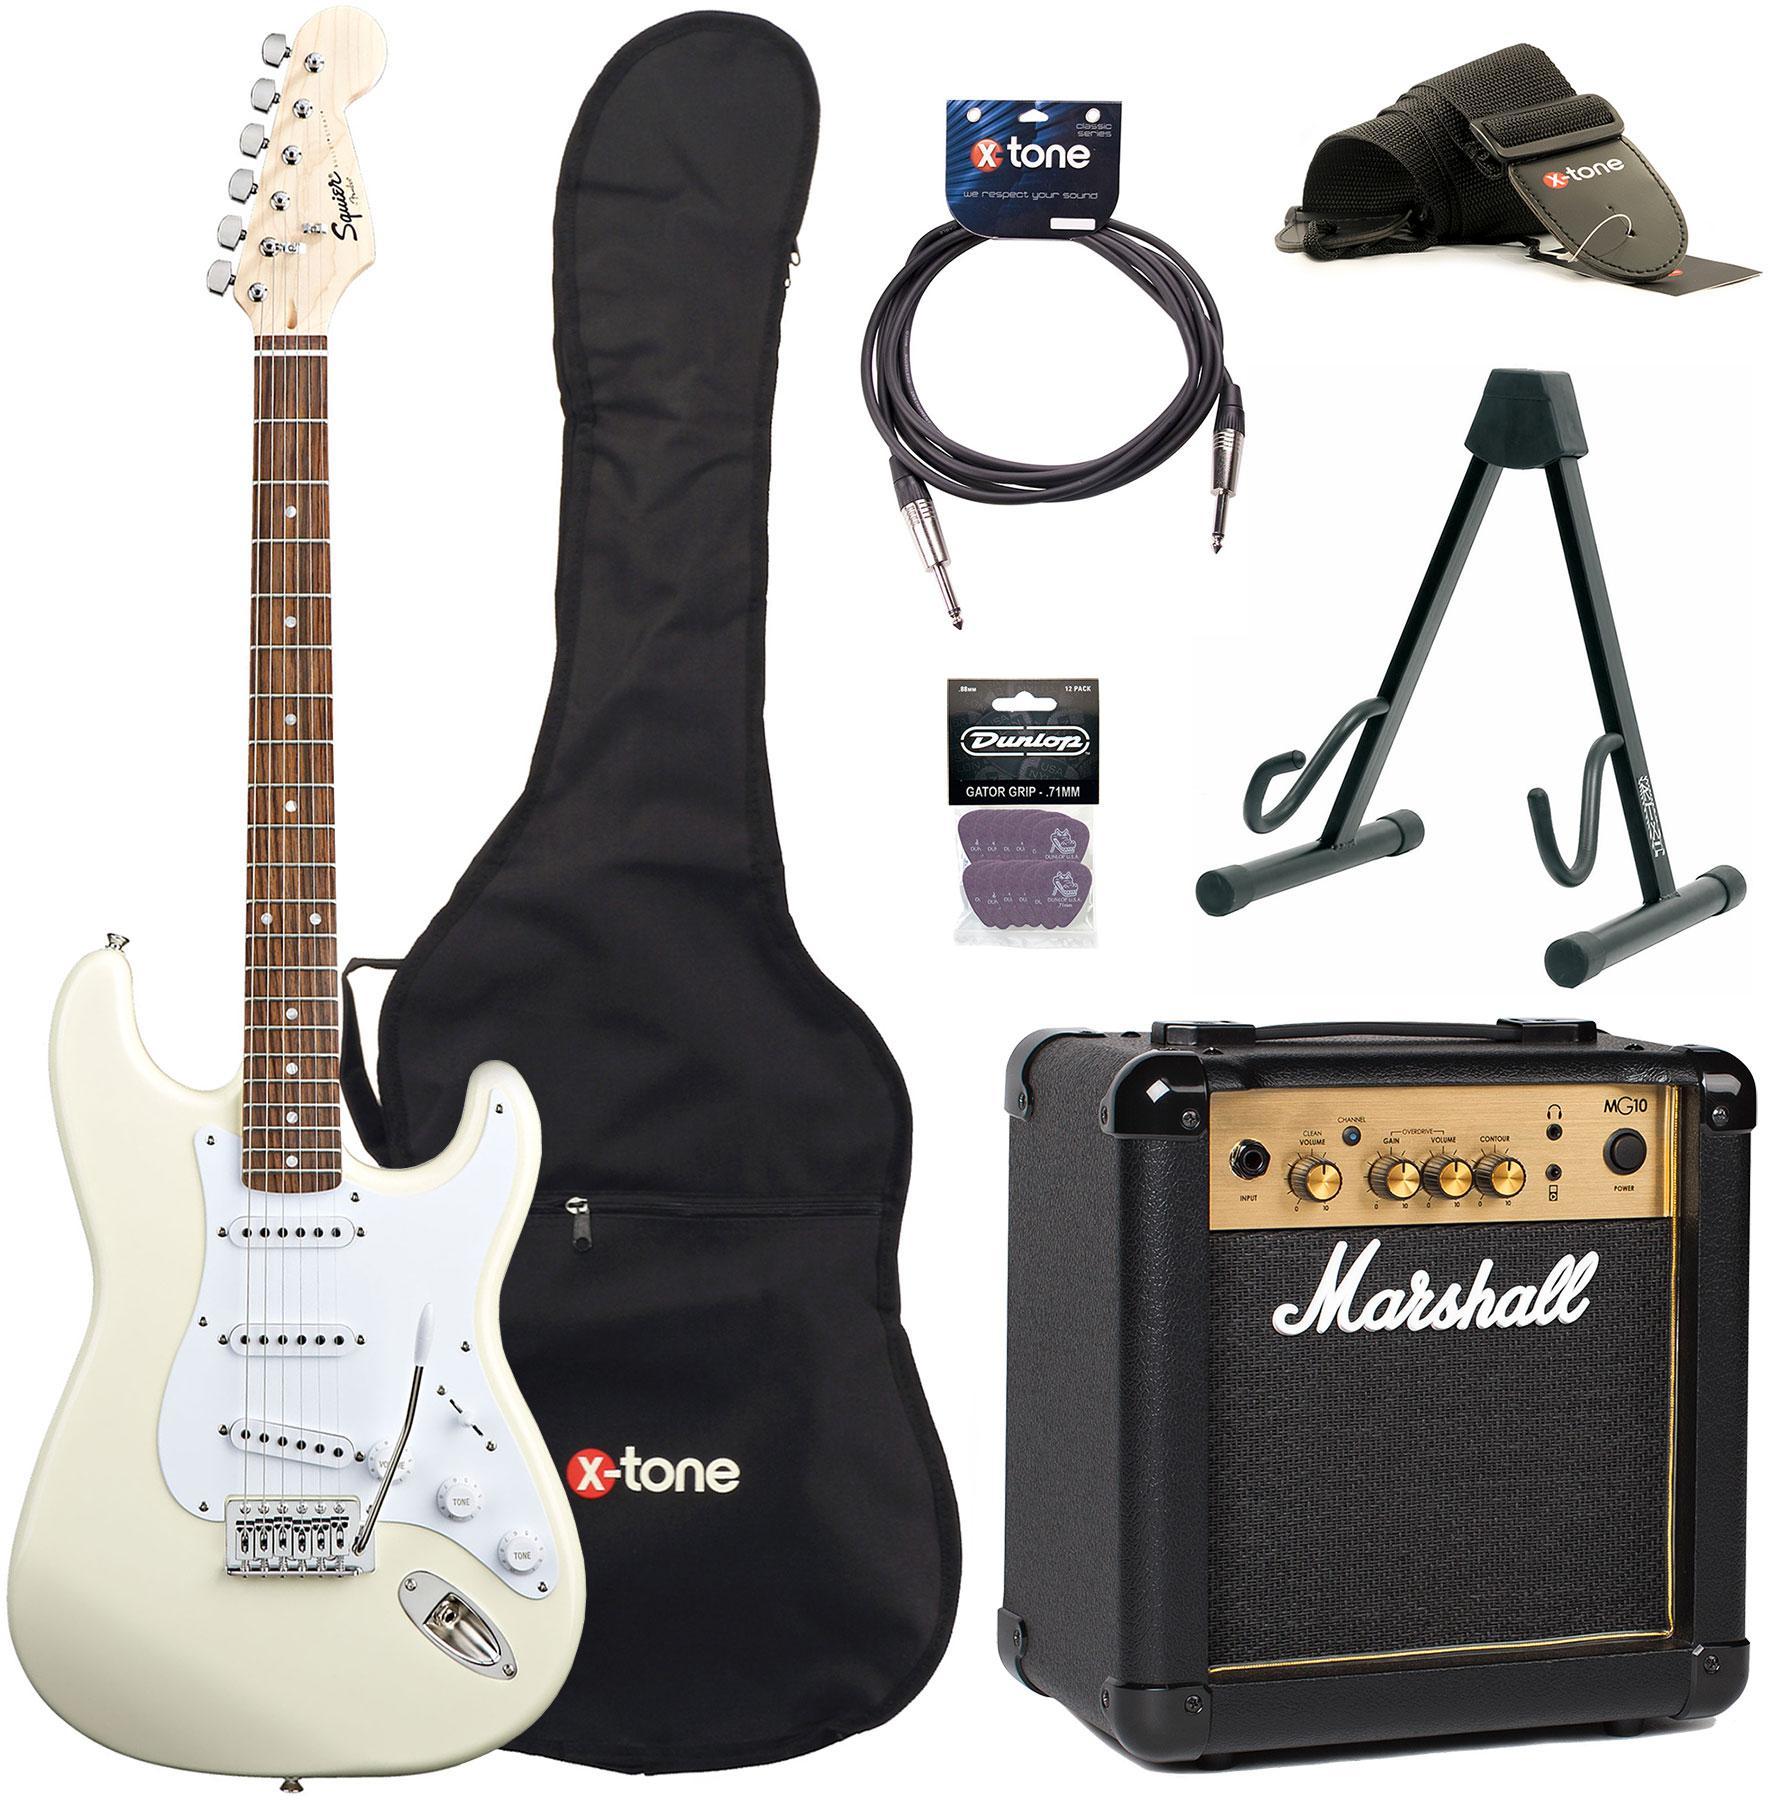 Electric guitar set Squier Strat Bullet SSS + Marshall MG10G + access X-Tone - Arctic white